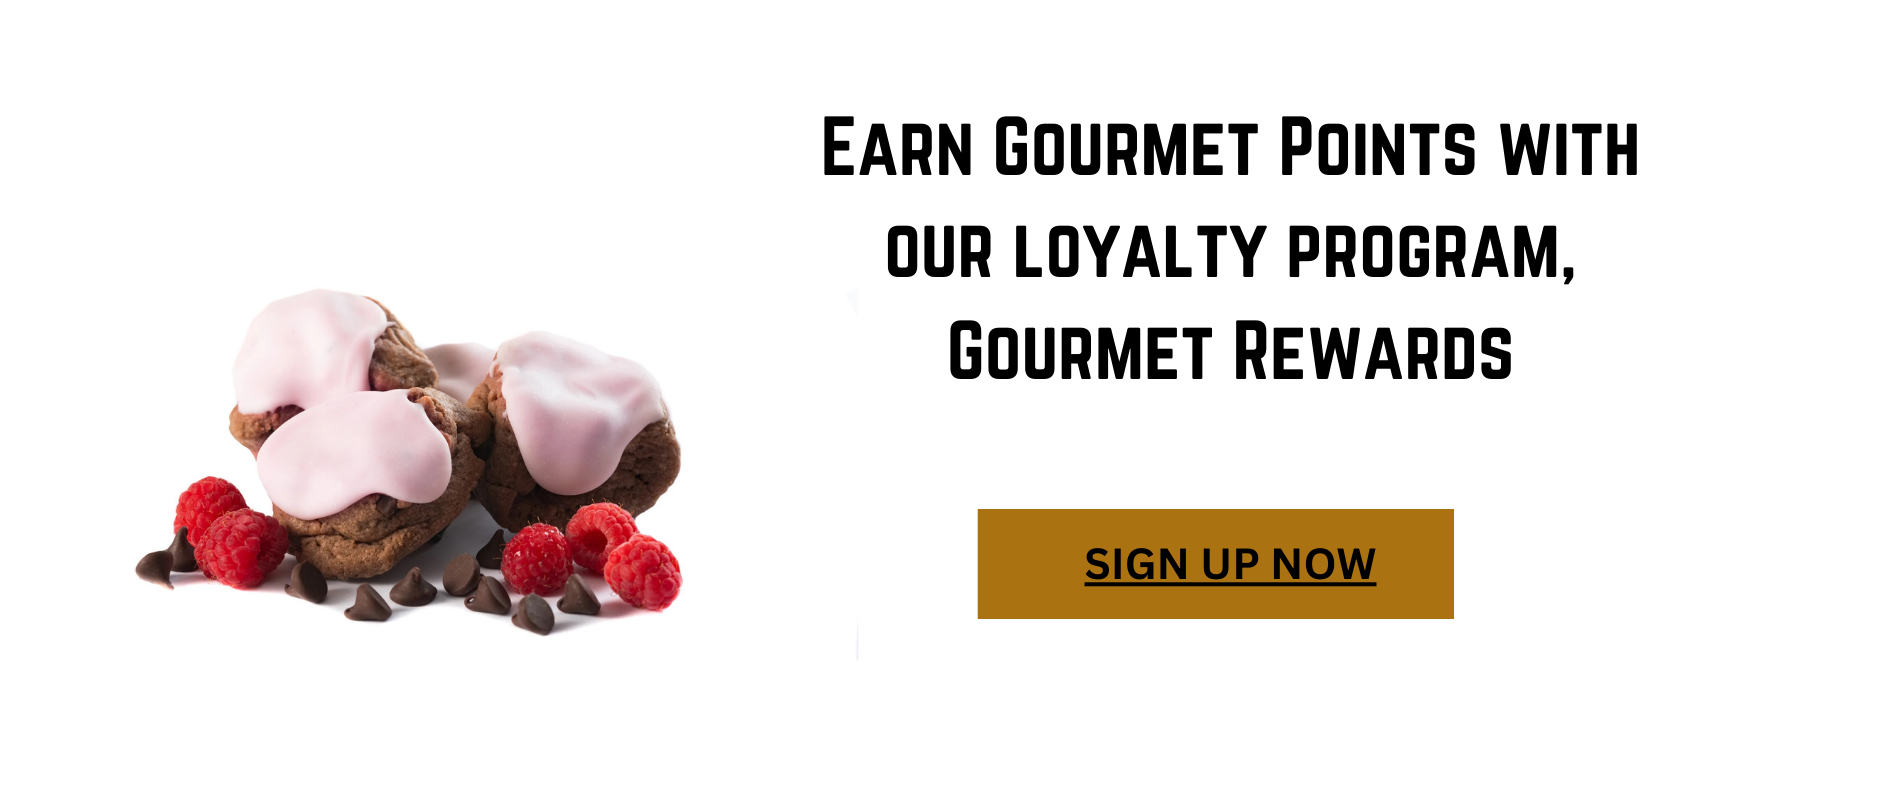 Earn loyalty rewards and points when you shop with us!